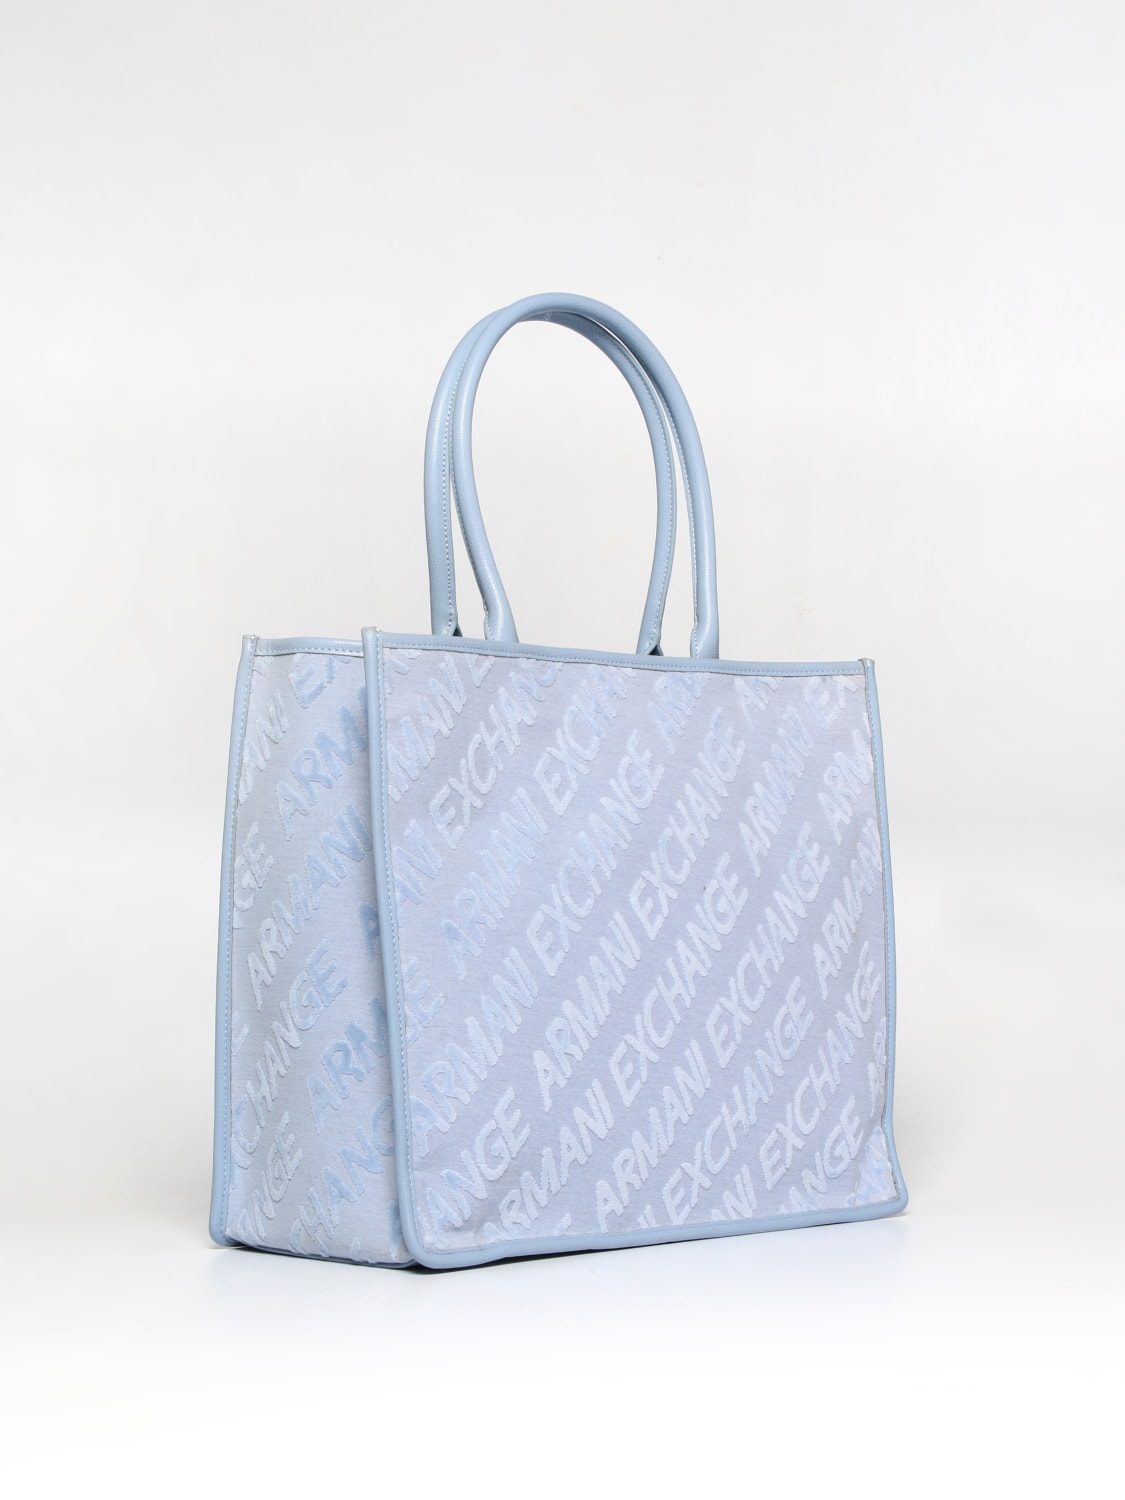 Armani Exchange Outlet: tote bags for woman - Sky Blue | Armani